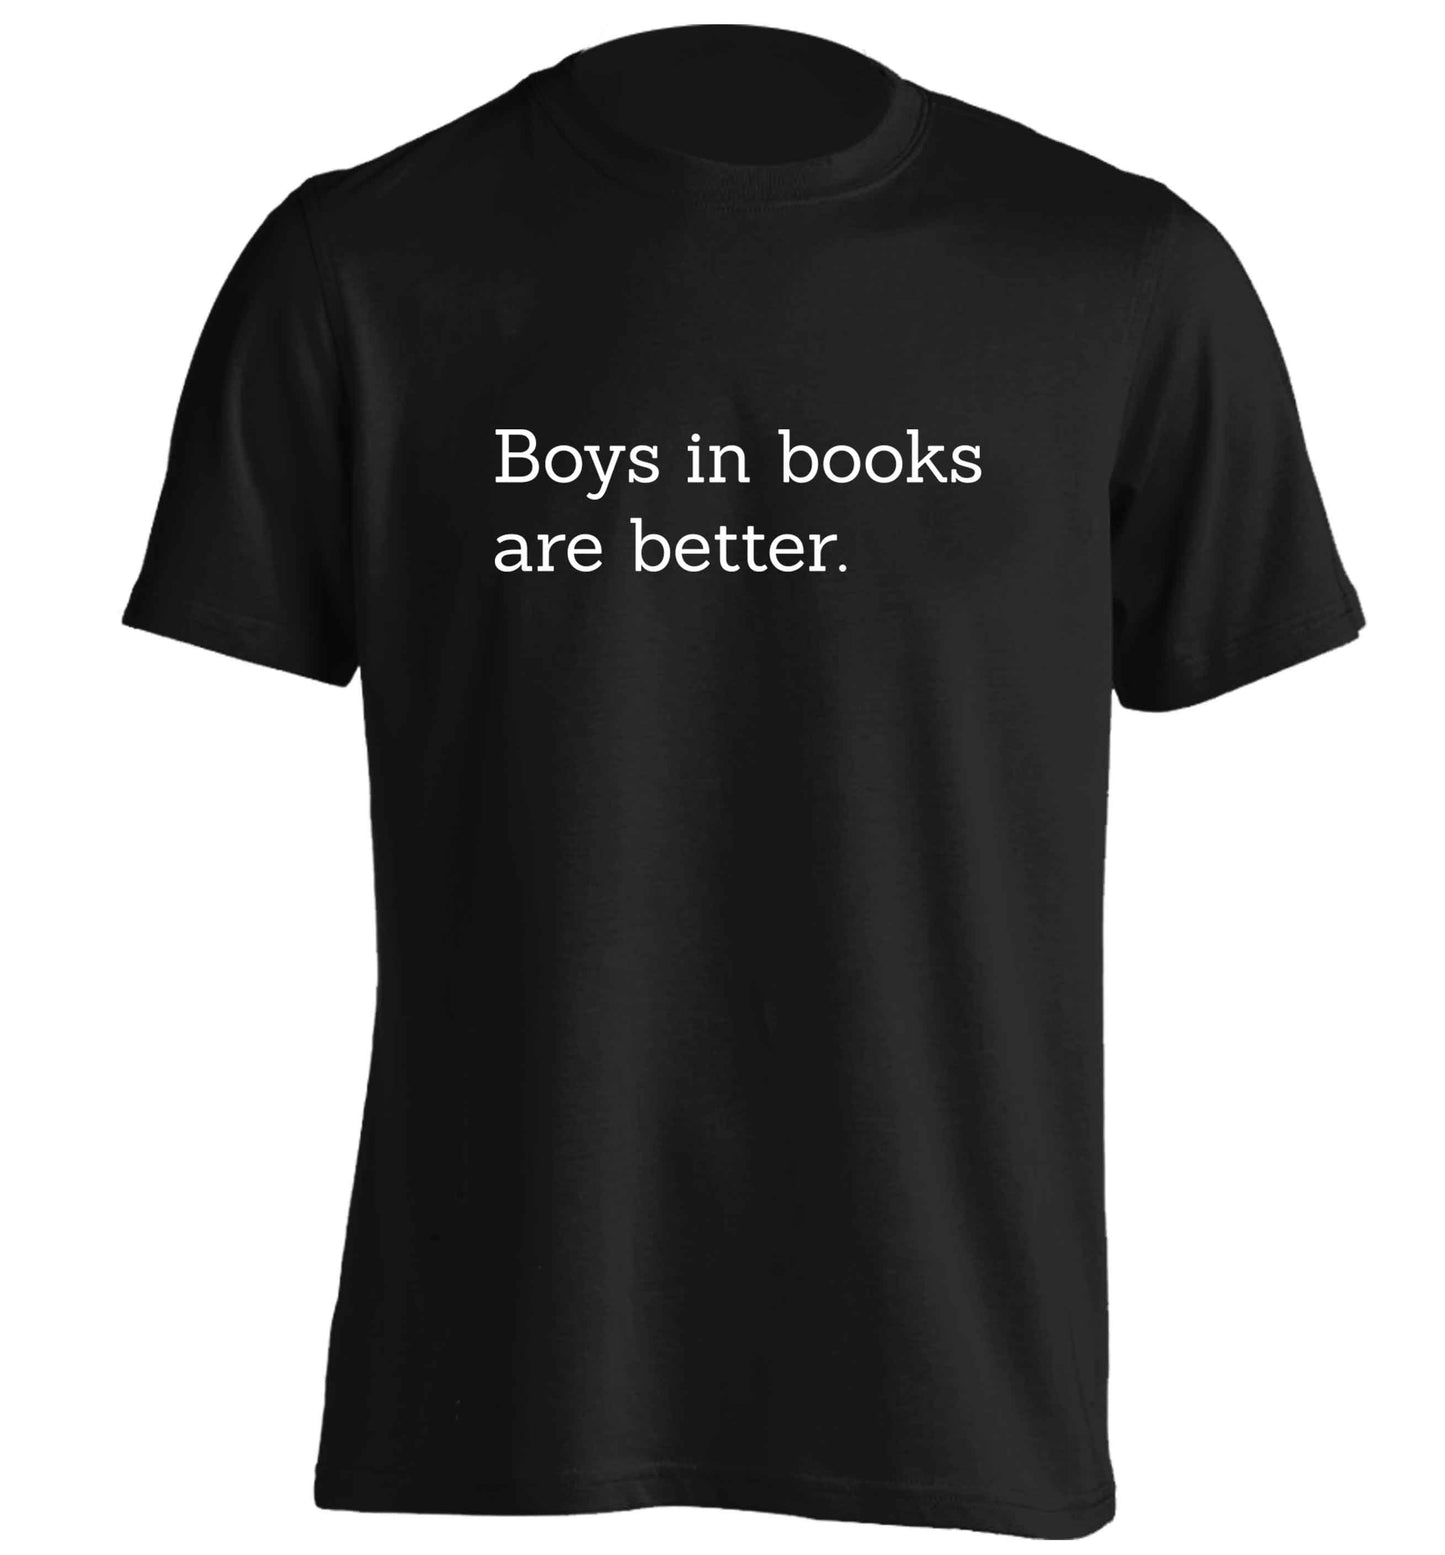 Boys in books are better adults unisex black Tshirt 2XL